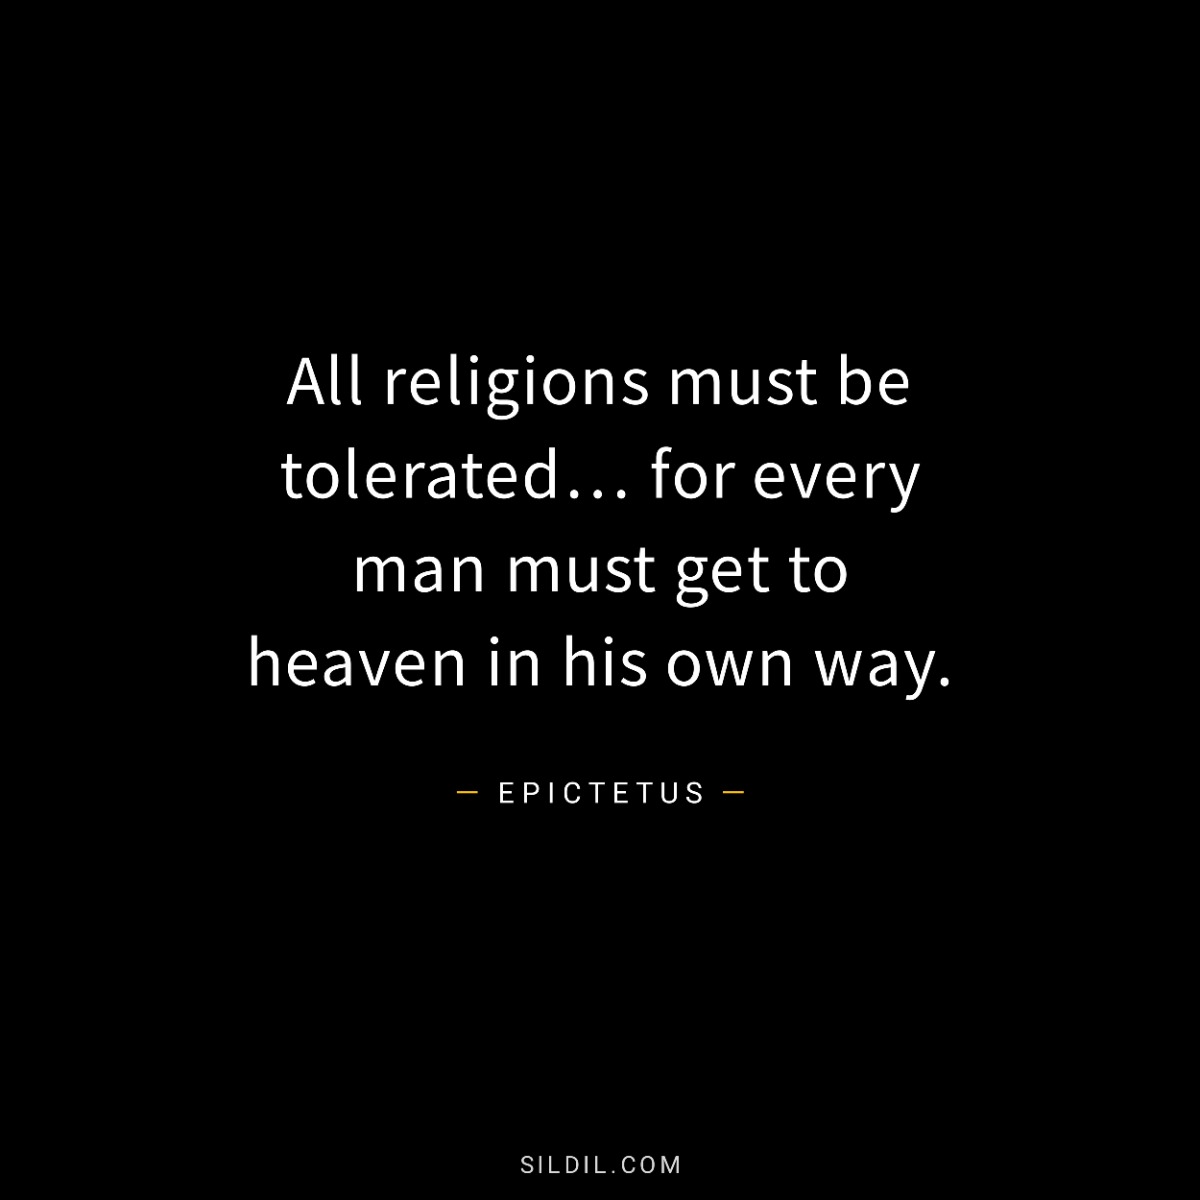 All religions must be tolerated… for every man must get to heaven in his own way.